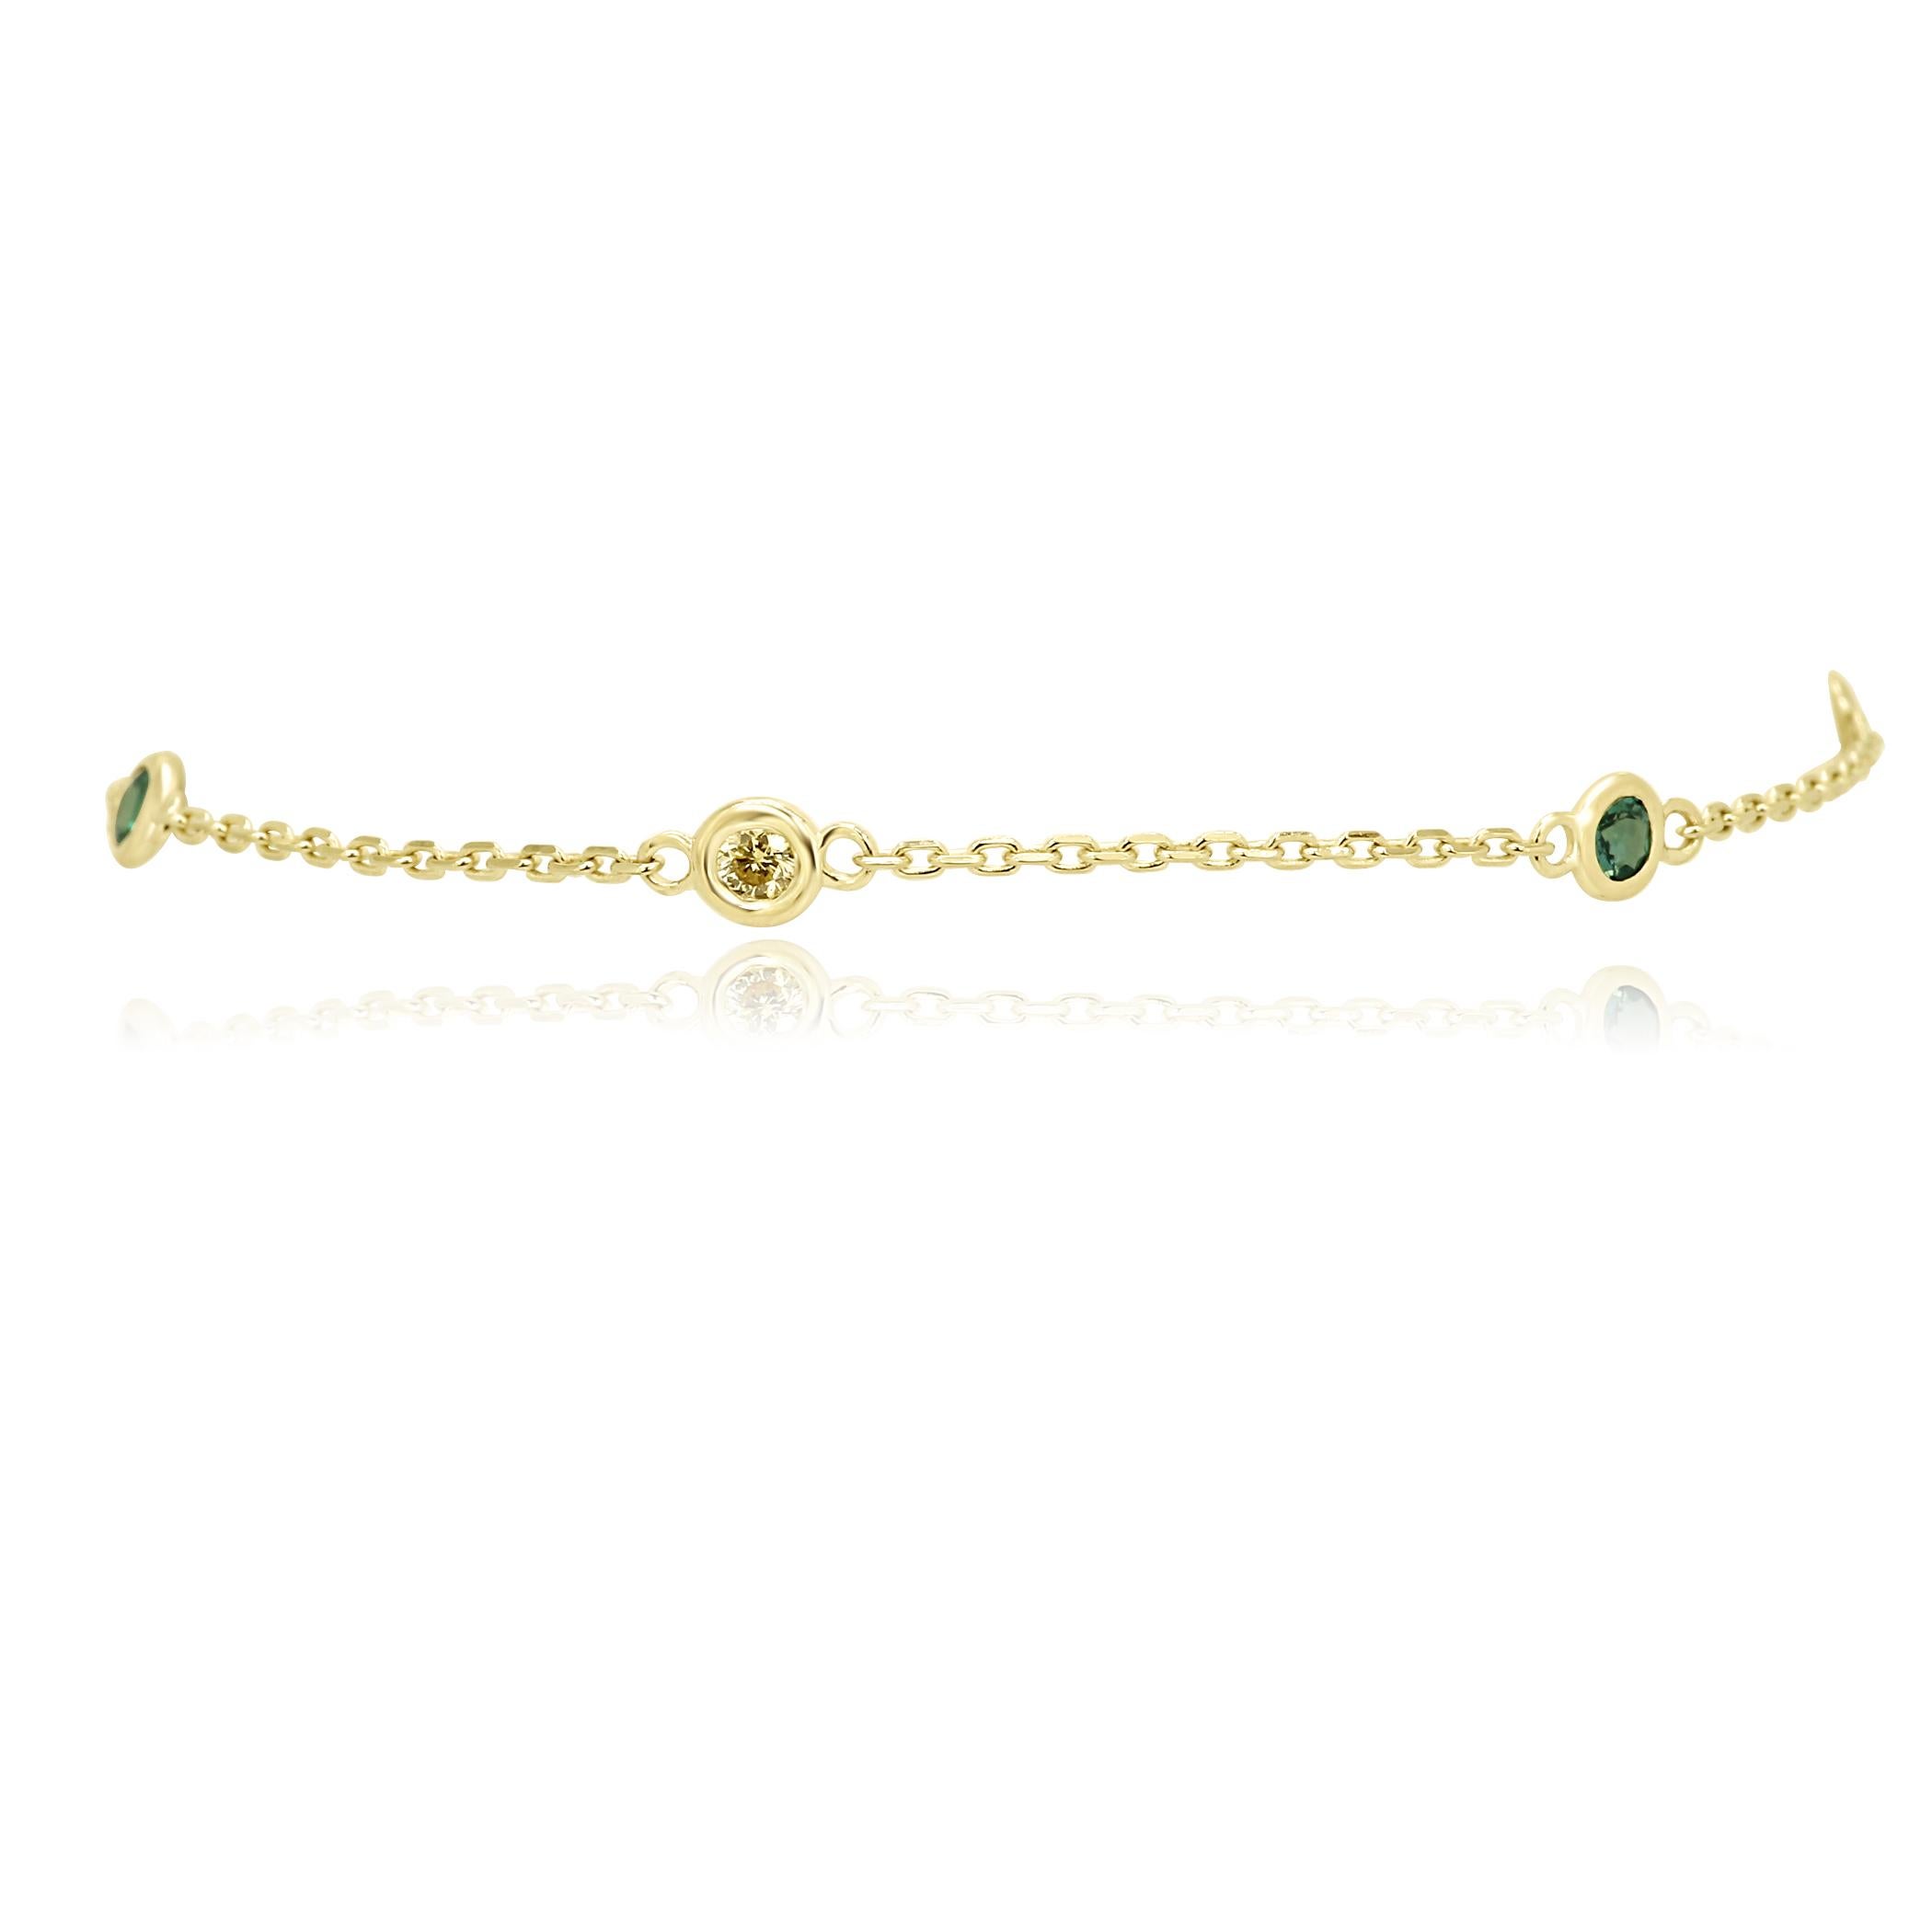 Alexandrite Rounds 0.28 Carat and Natural Fancy Yellow Diamond Rounds 0.12 Carat in Bezel set Diamond By Yard Style Bracelet and Anklet in 14K Yellow Gold.

Style available in different price ranges. Prices are based on your selection of 4C's Cut,